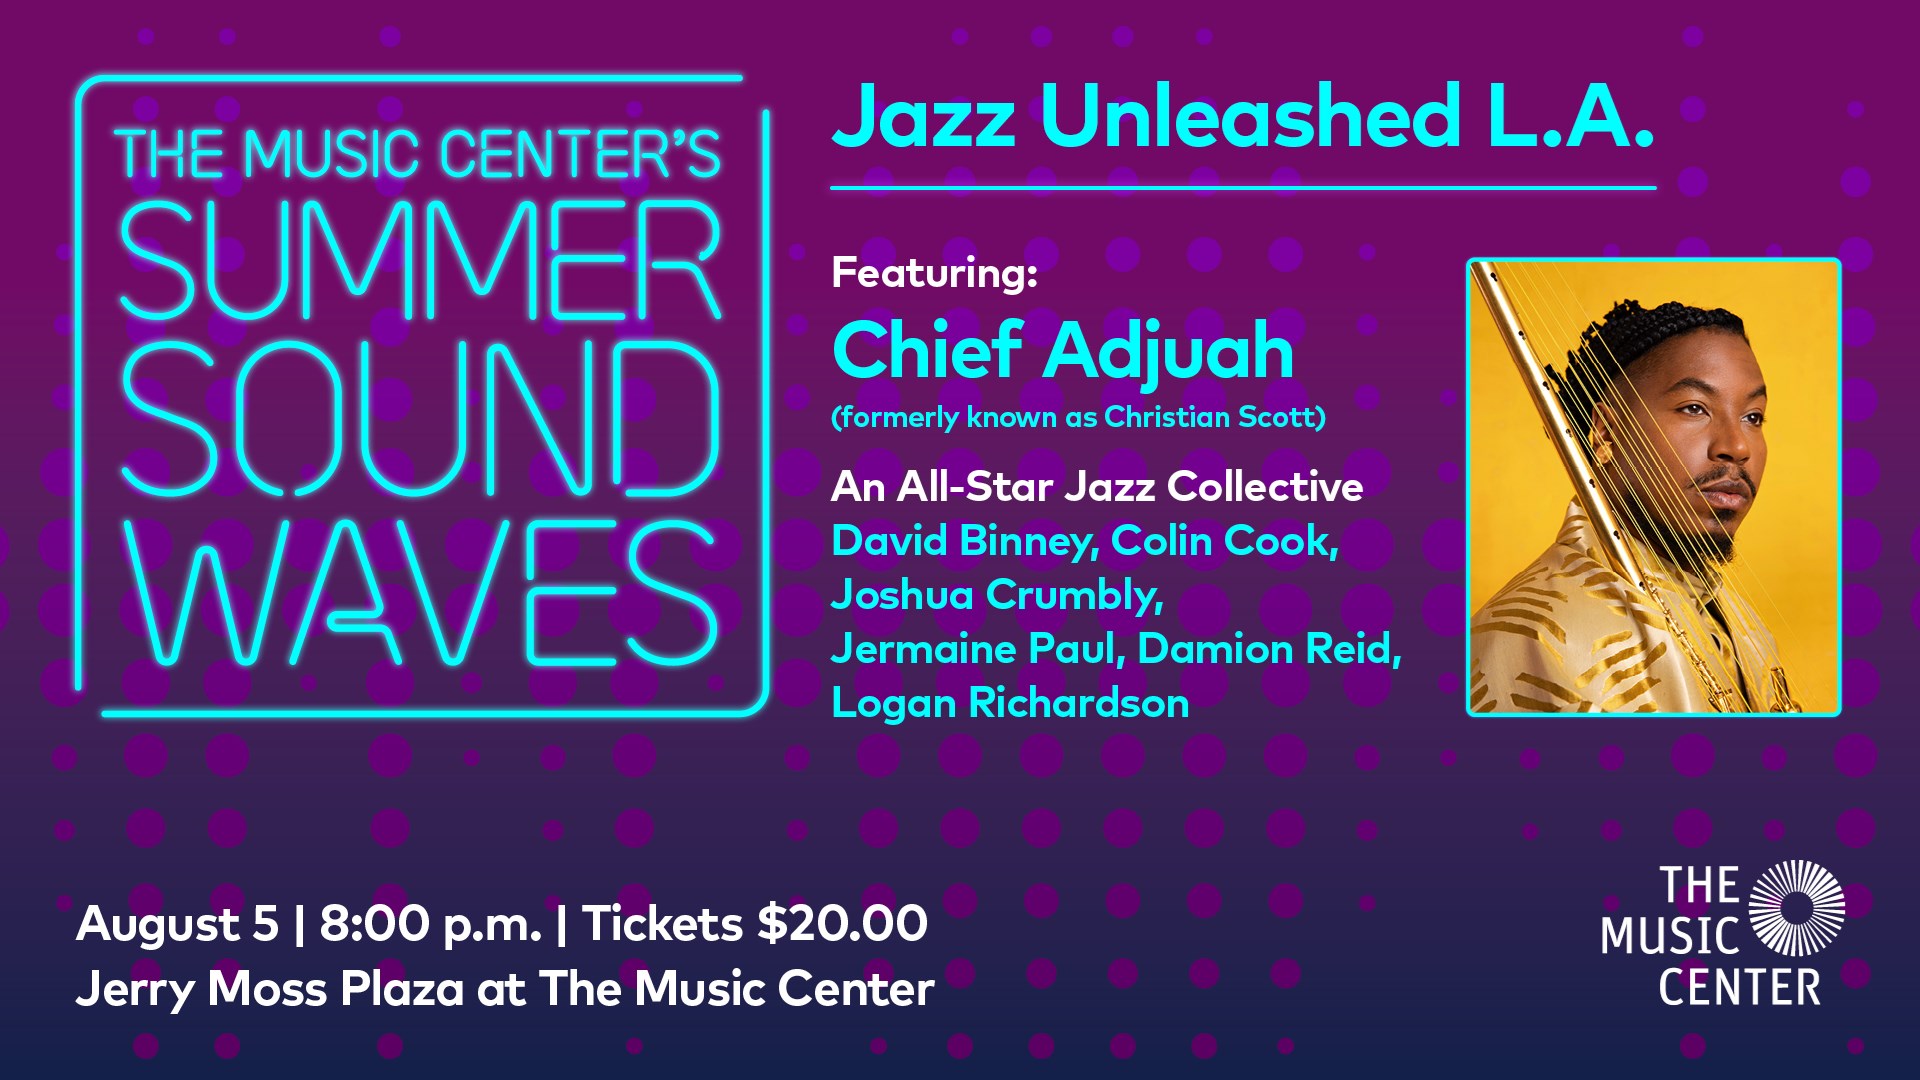 The Music Center's Summer SoundWaves: Jazz Unleashed L.A.